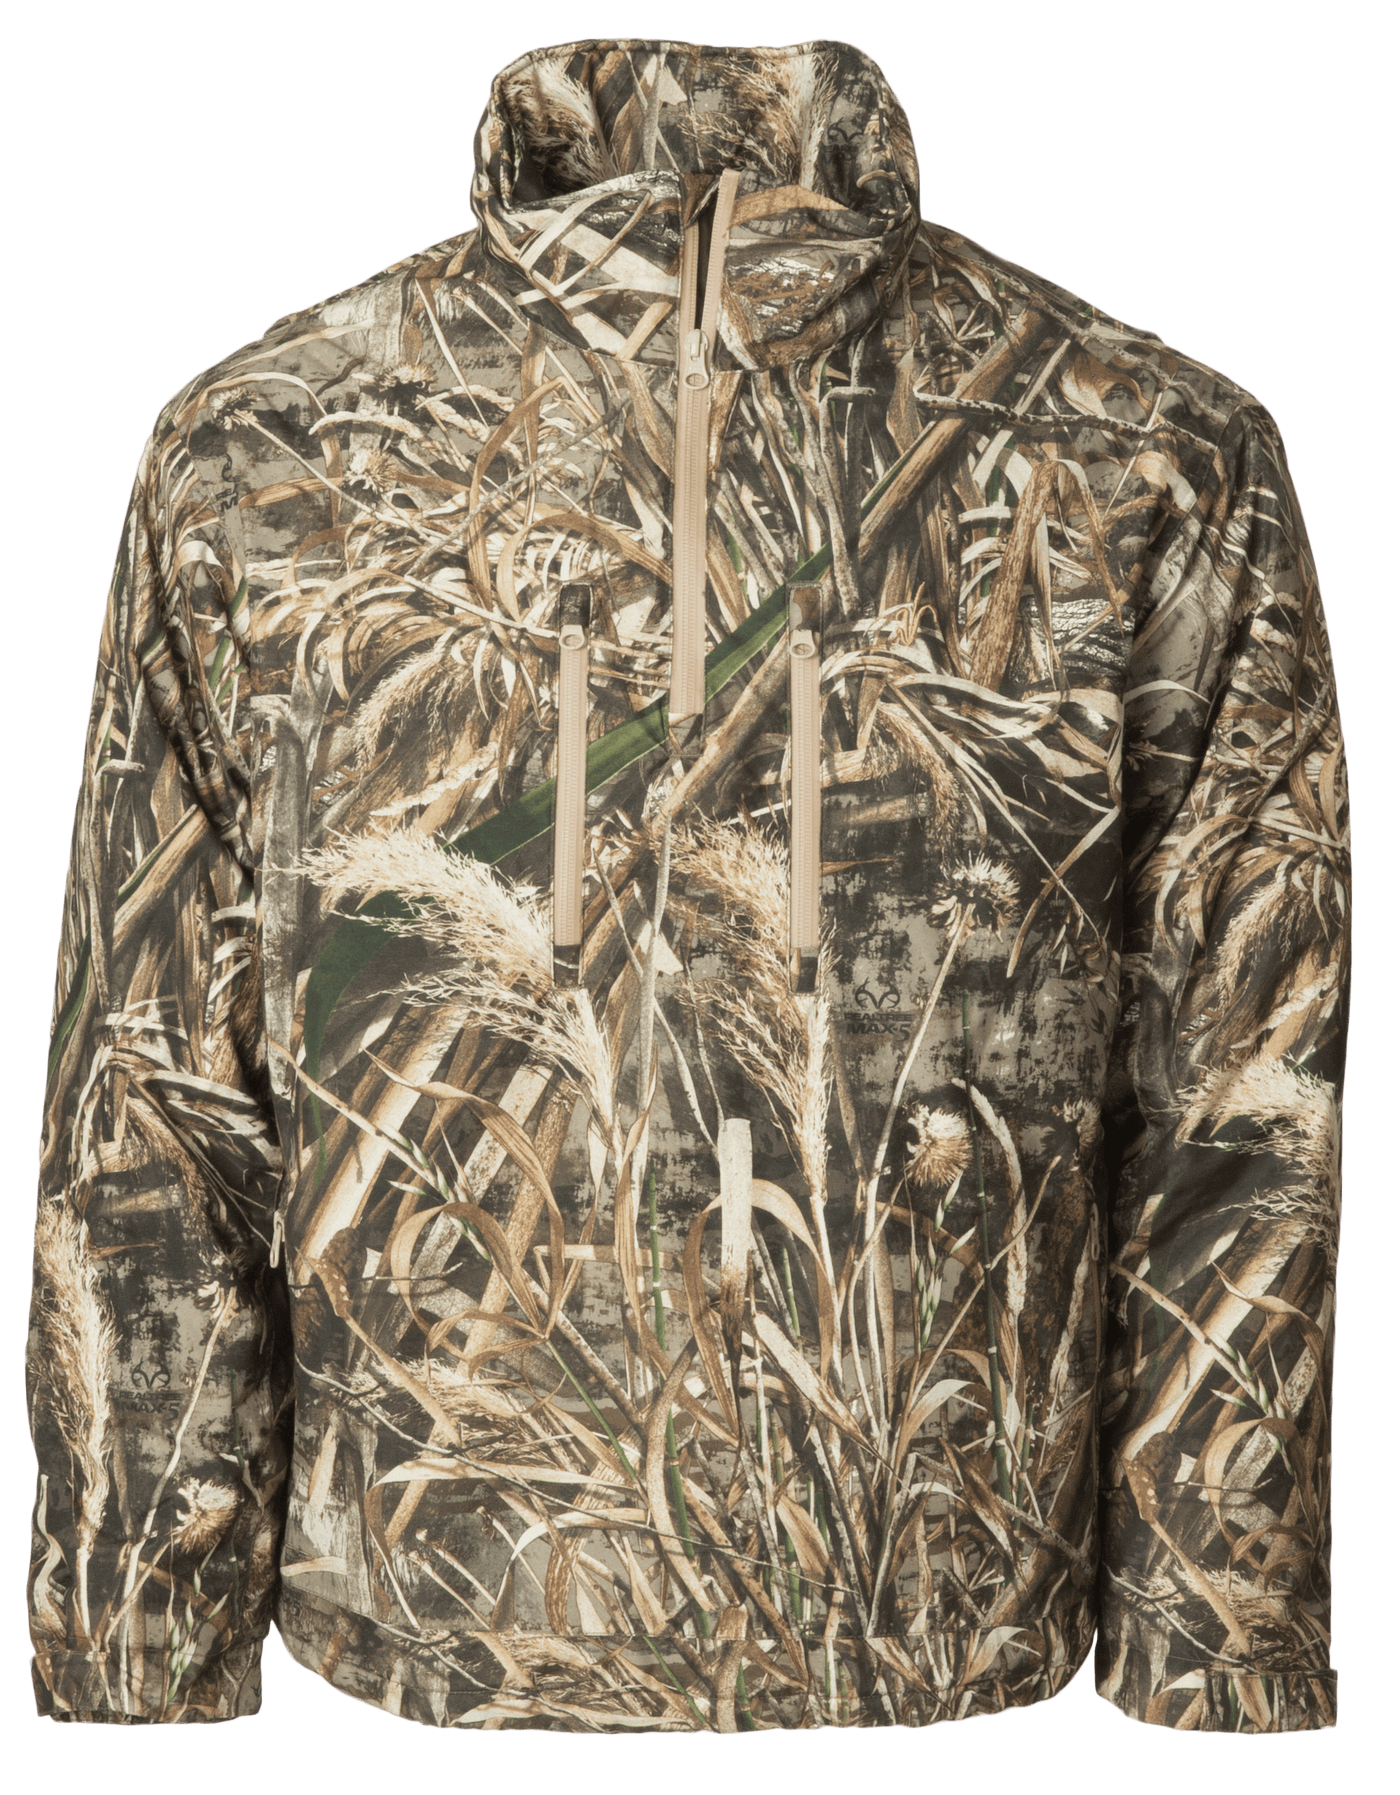 Avery Avery 1/4 Zip Insulated Pullover - Realtree Max5 / X-Large Realtree Max5 / X-Large Clothing